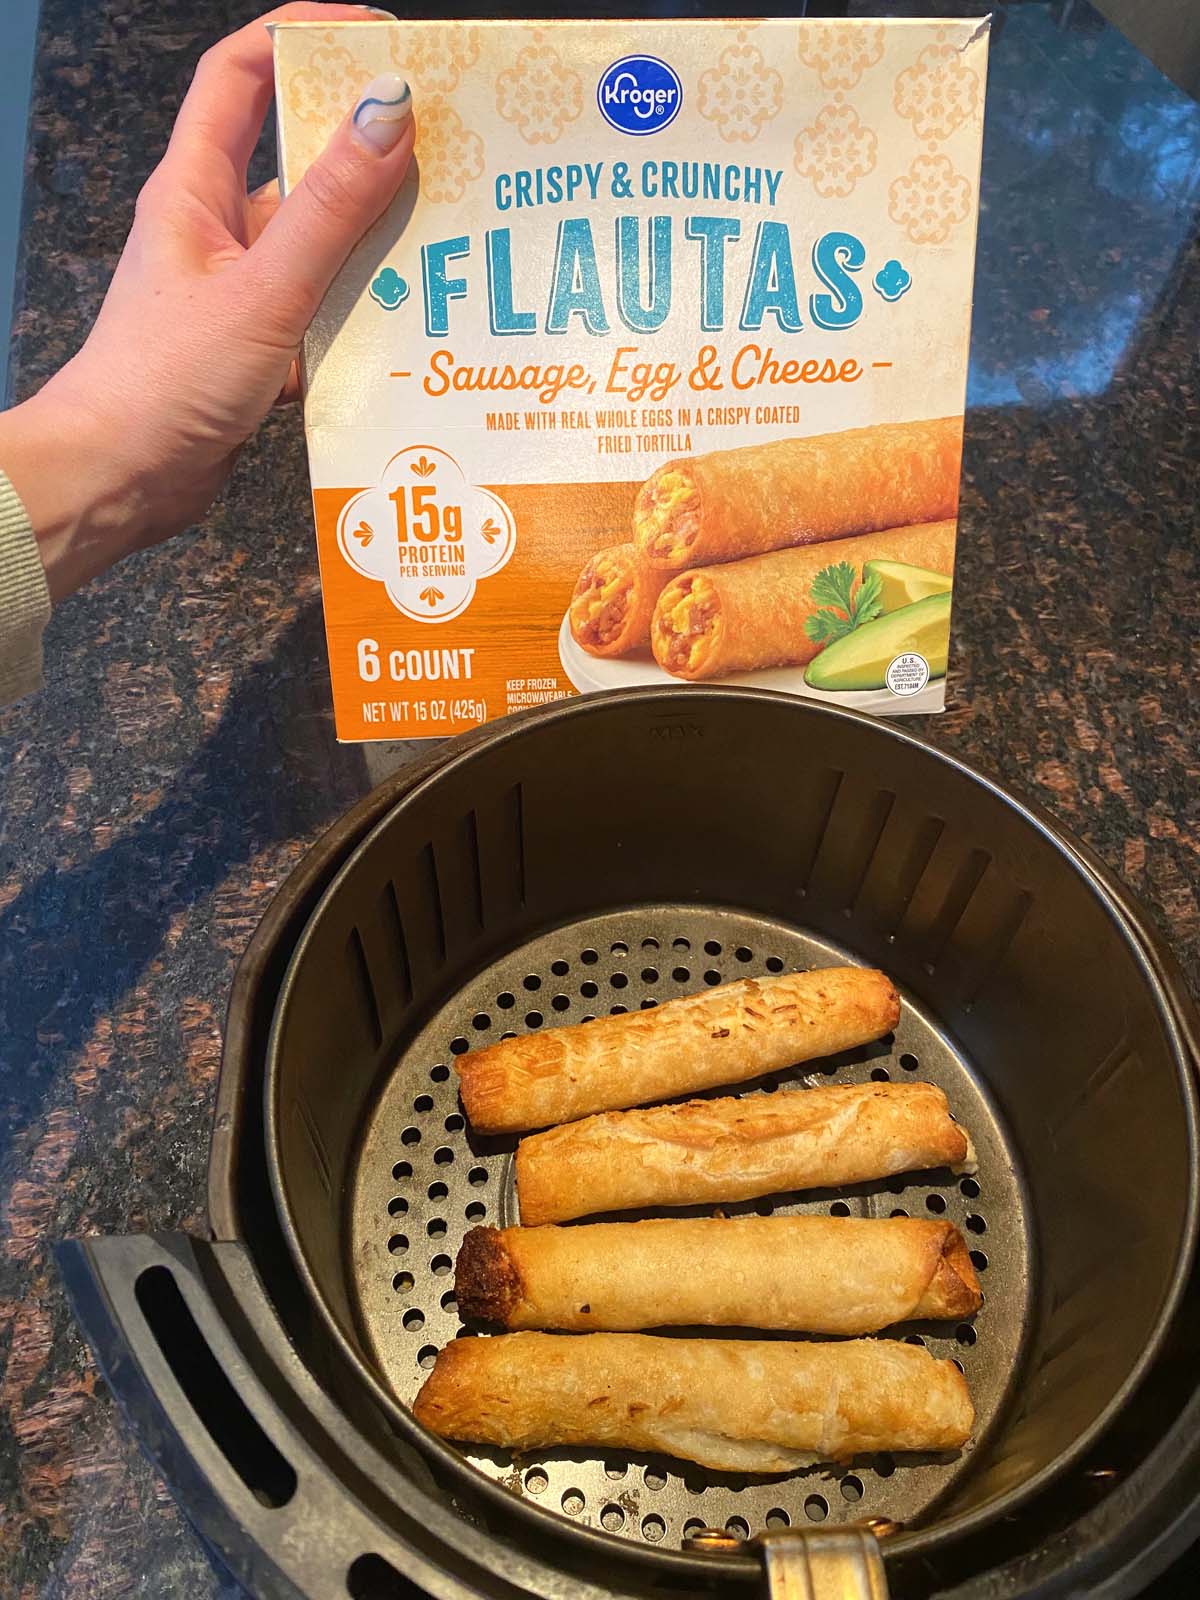 Cooked flautas in an air fryer and a box of frozen flautas.